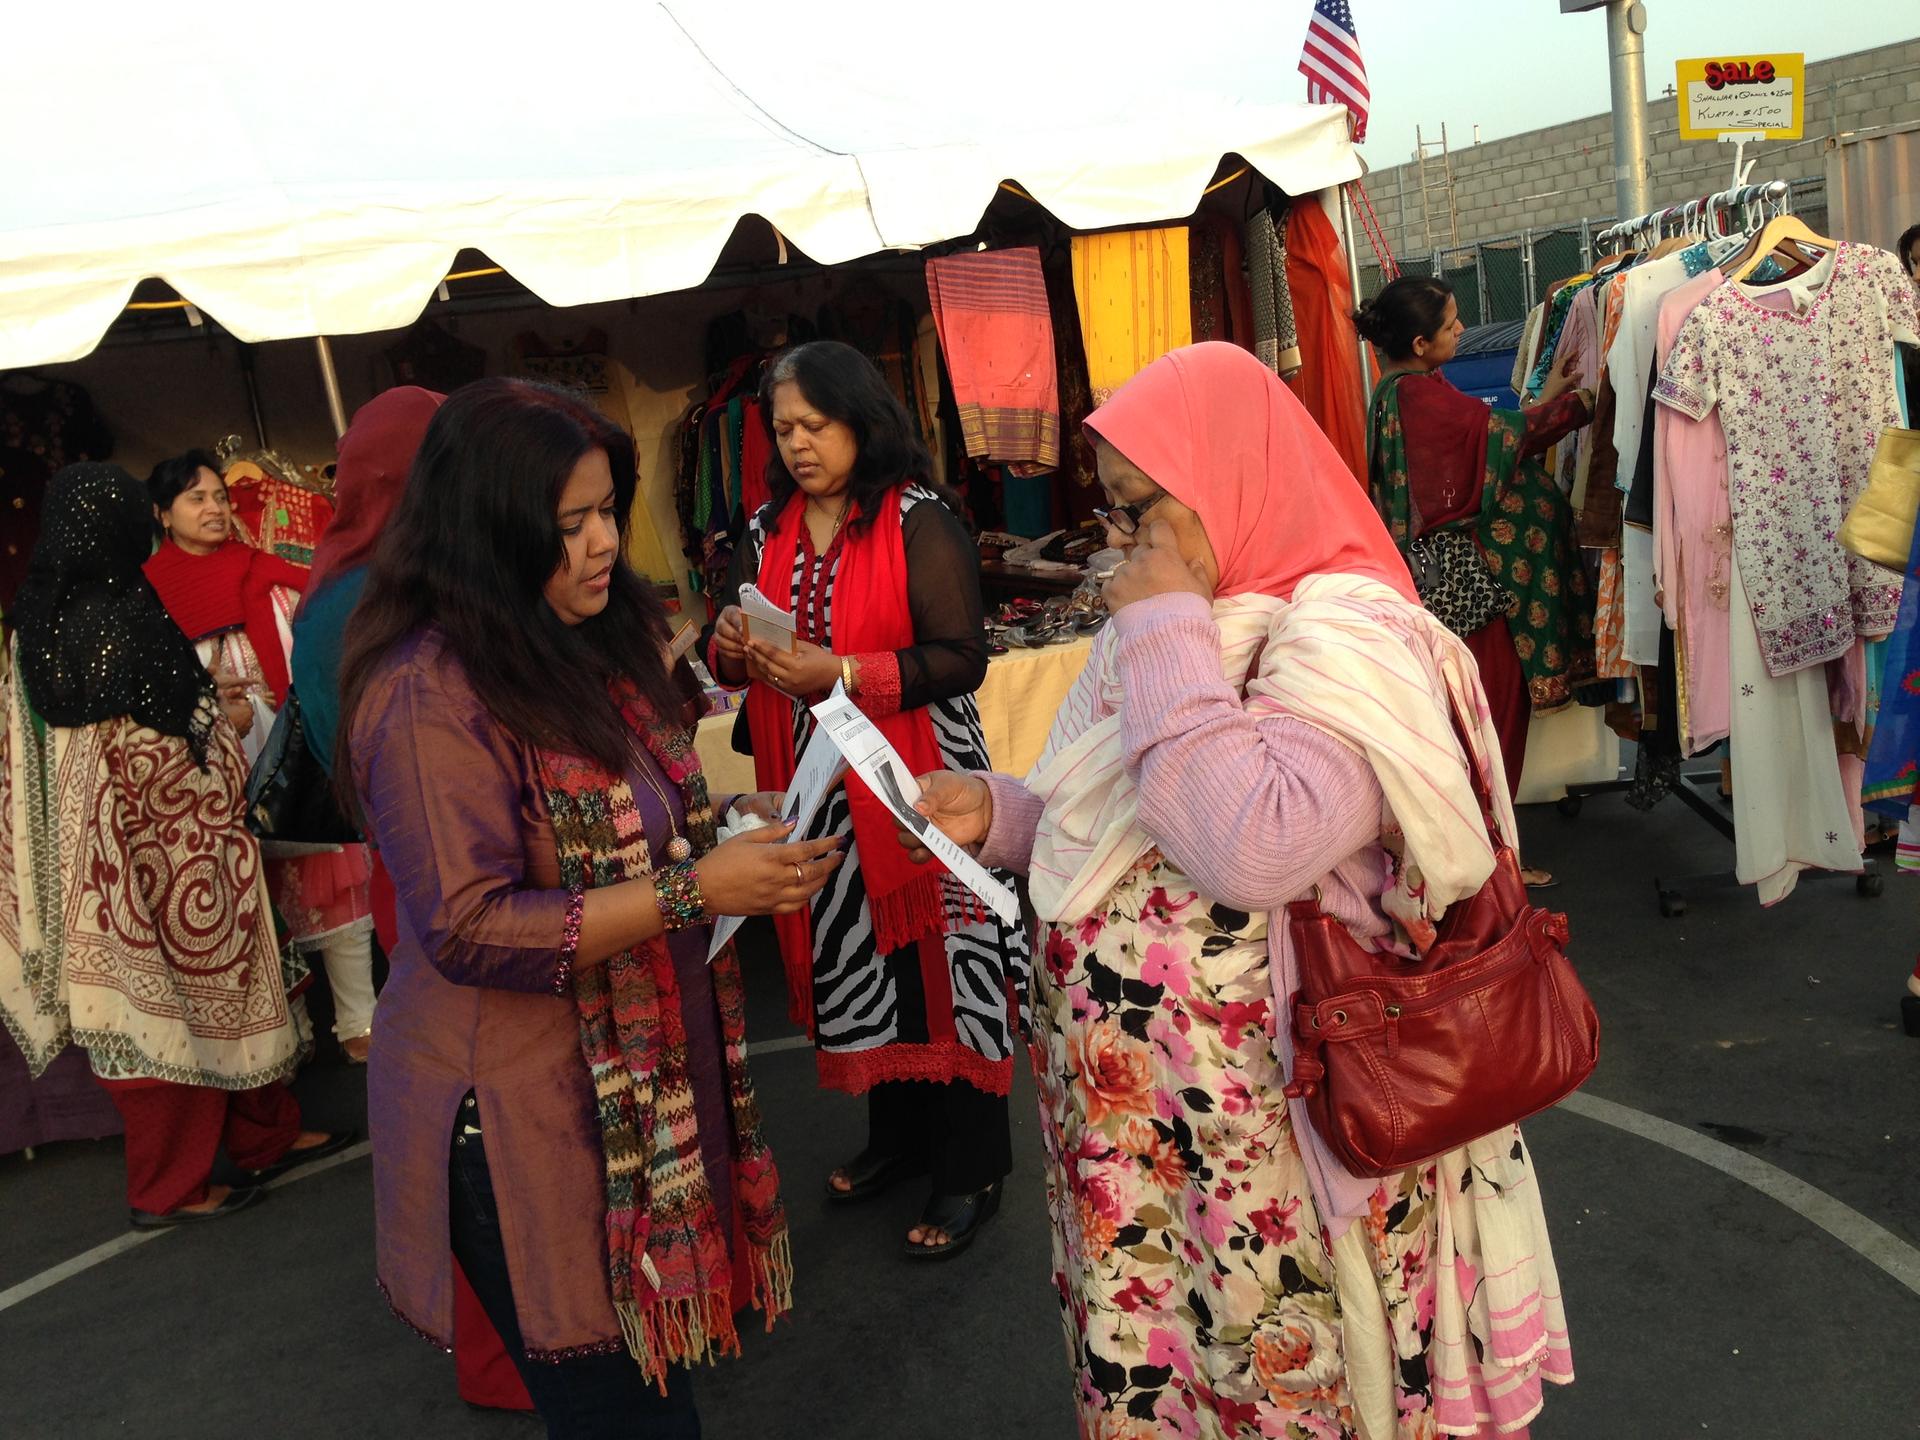 Riffat Rahman, a health care advocate, conducts outreach about the Affordable Care Act in a Los Angeles neighborhood called Little Bangladesh. 